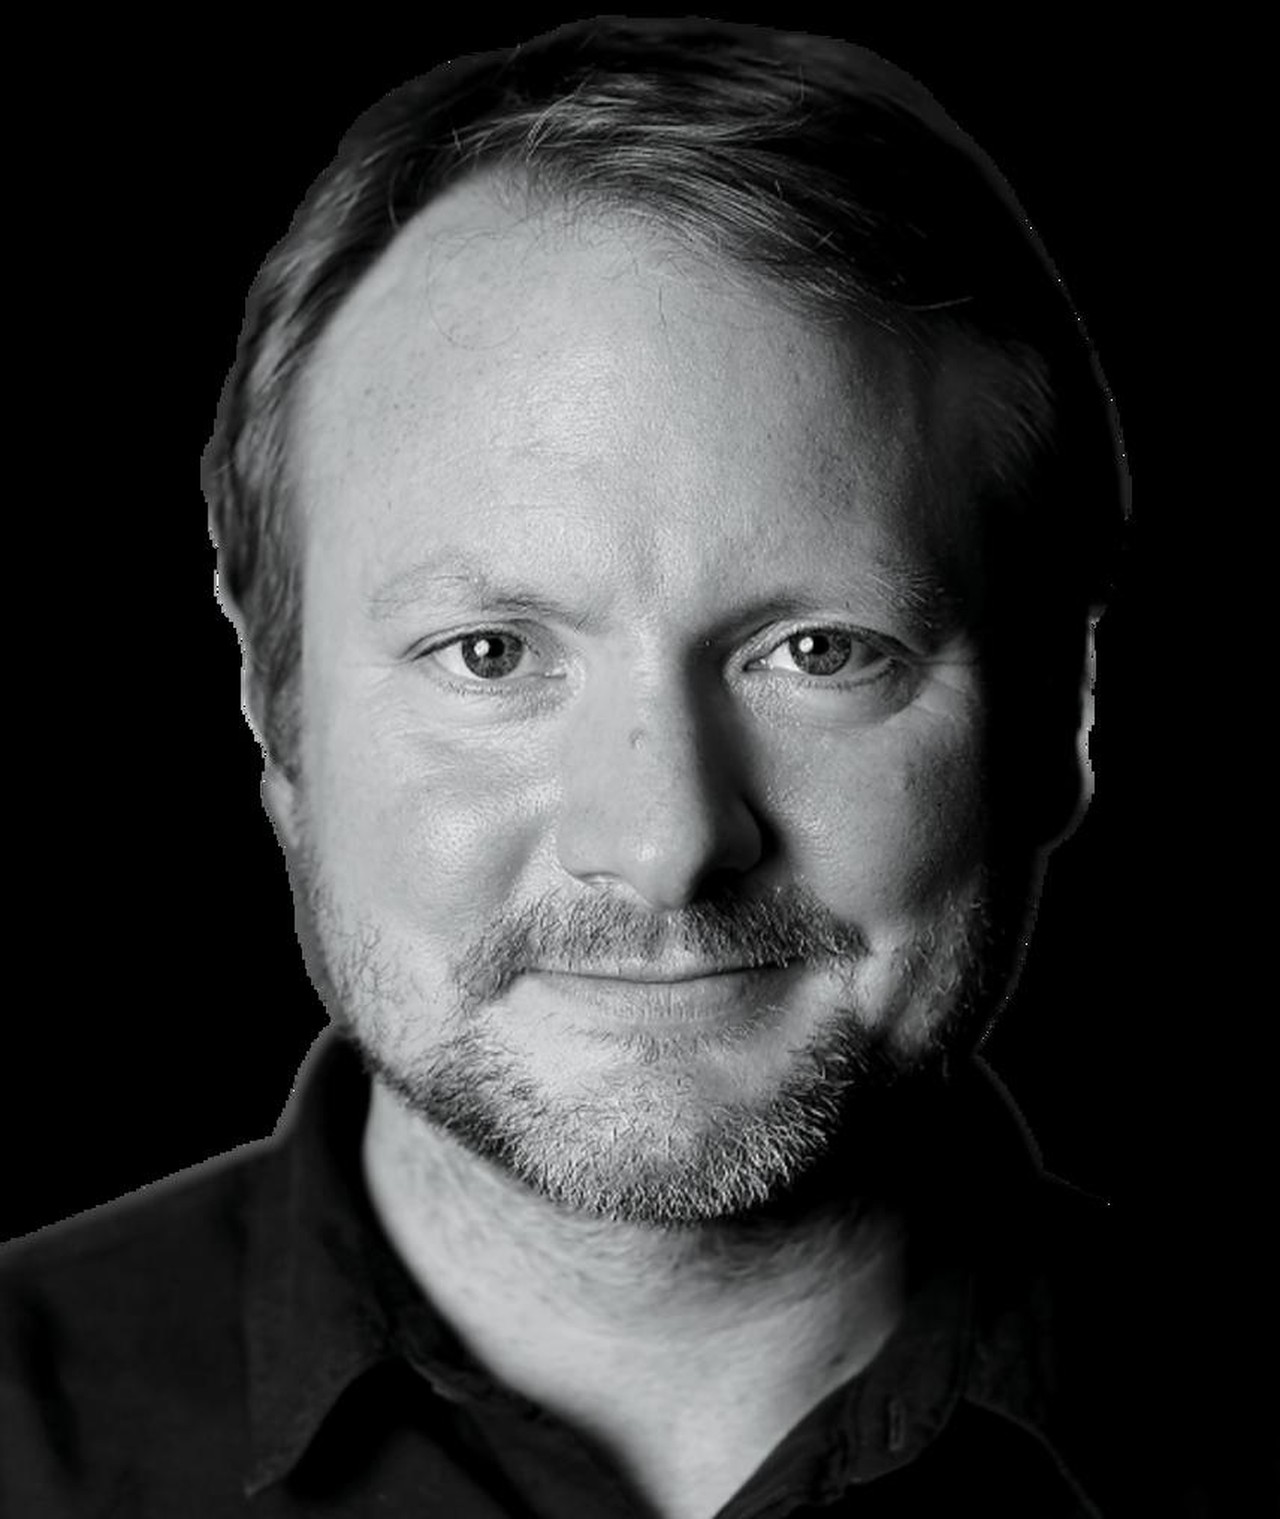 Rian Johnson Biography - American writer, director and producer